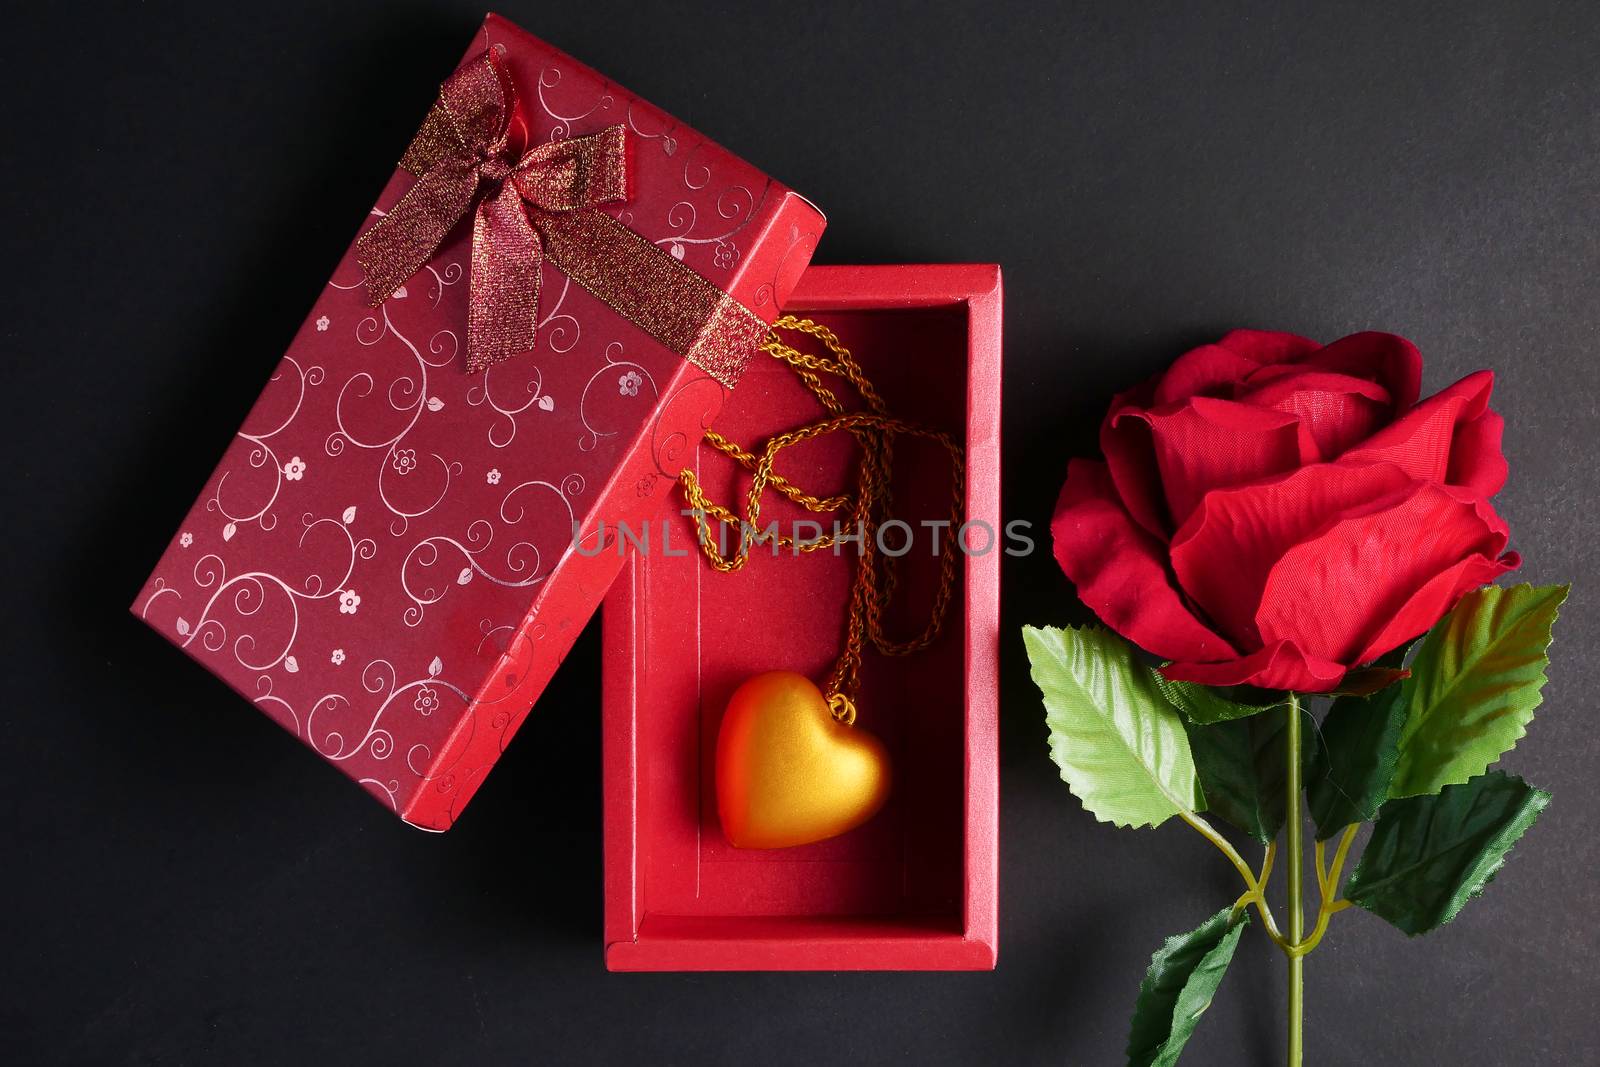 Red rose with gold heart necklace in red gift box on black background. Concept of Valentine Day.